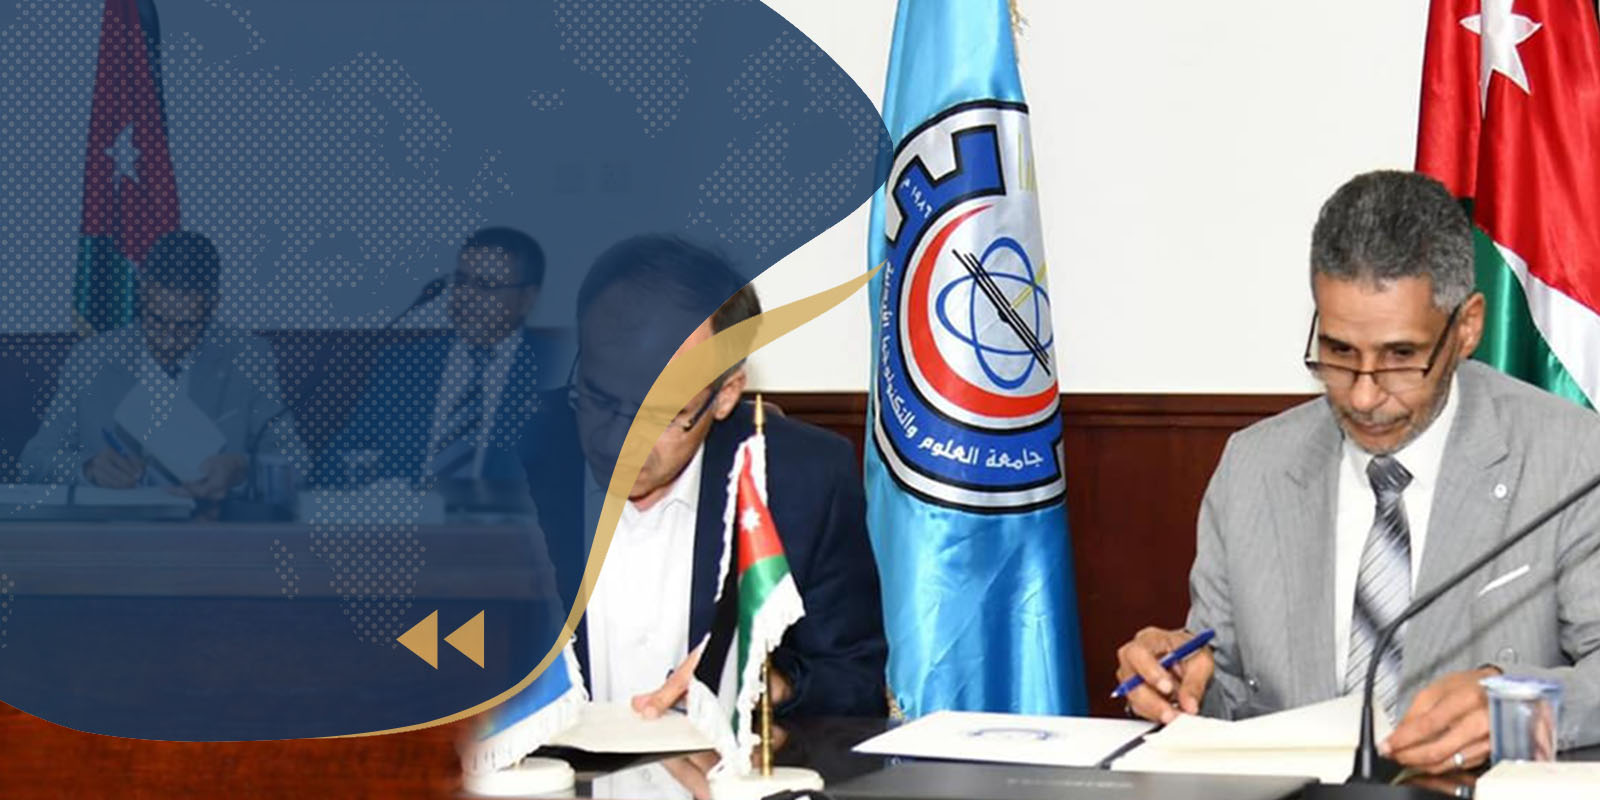 Sirte University and Jordanian University for Sciences and Technology have signed MoU